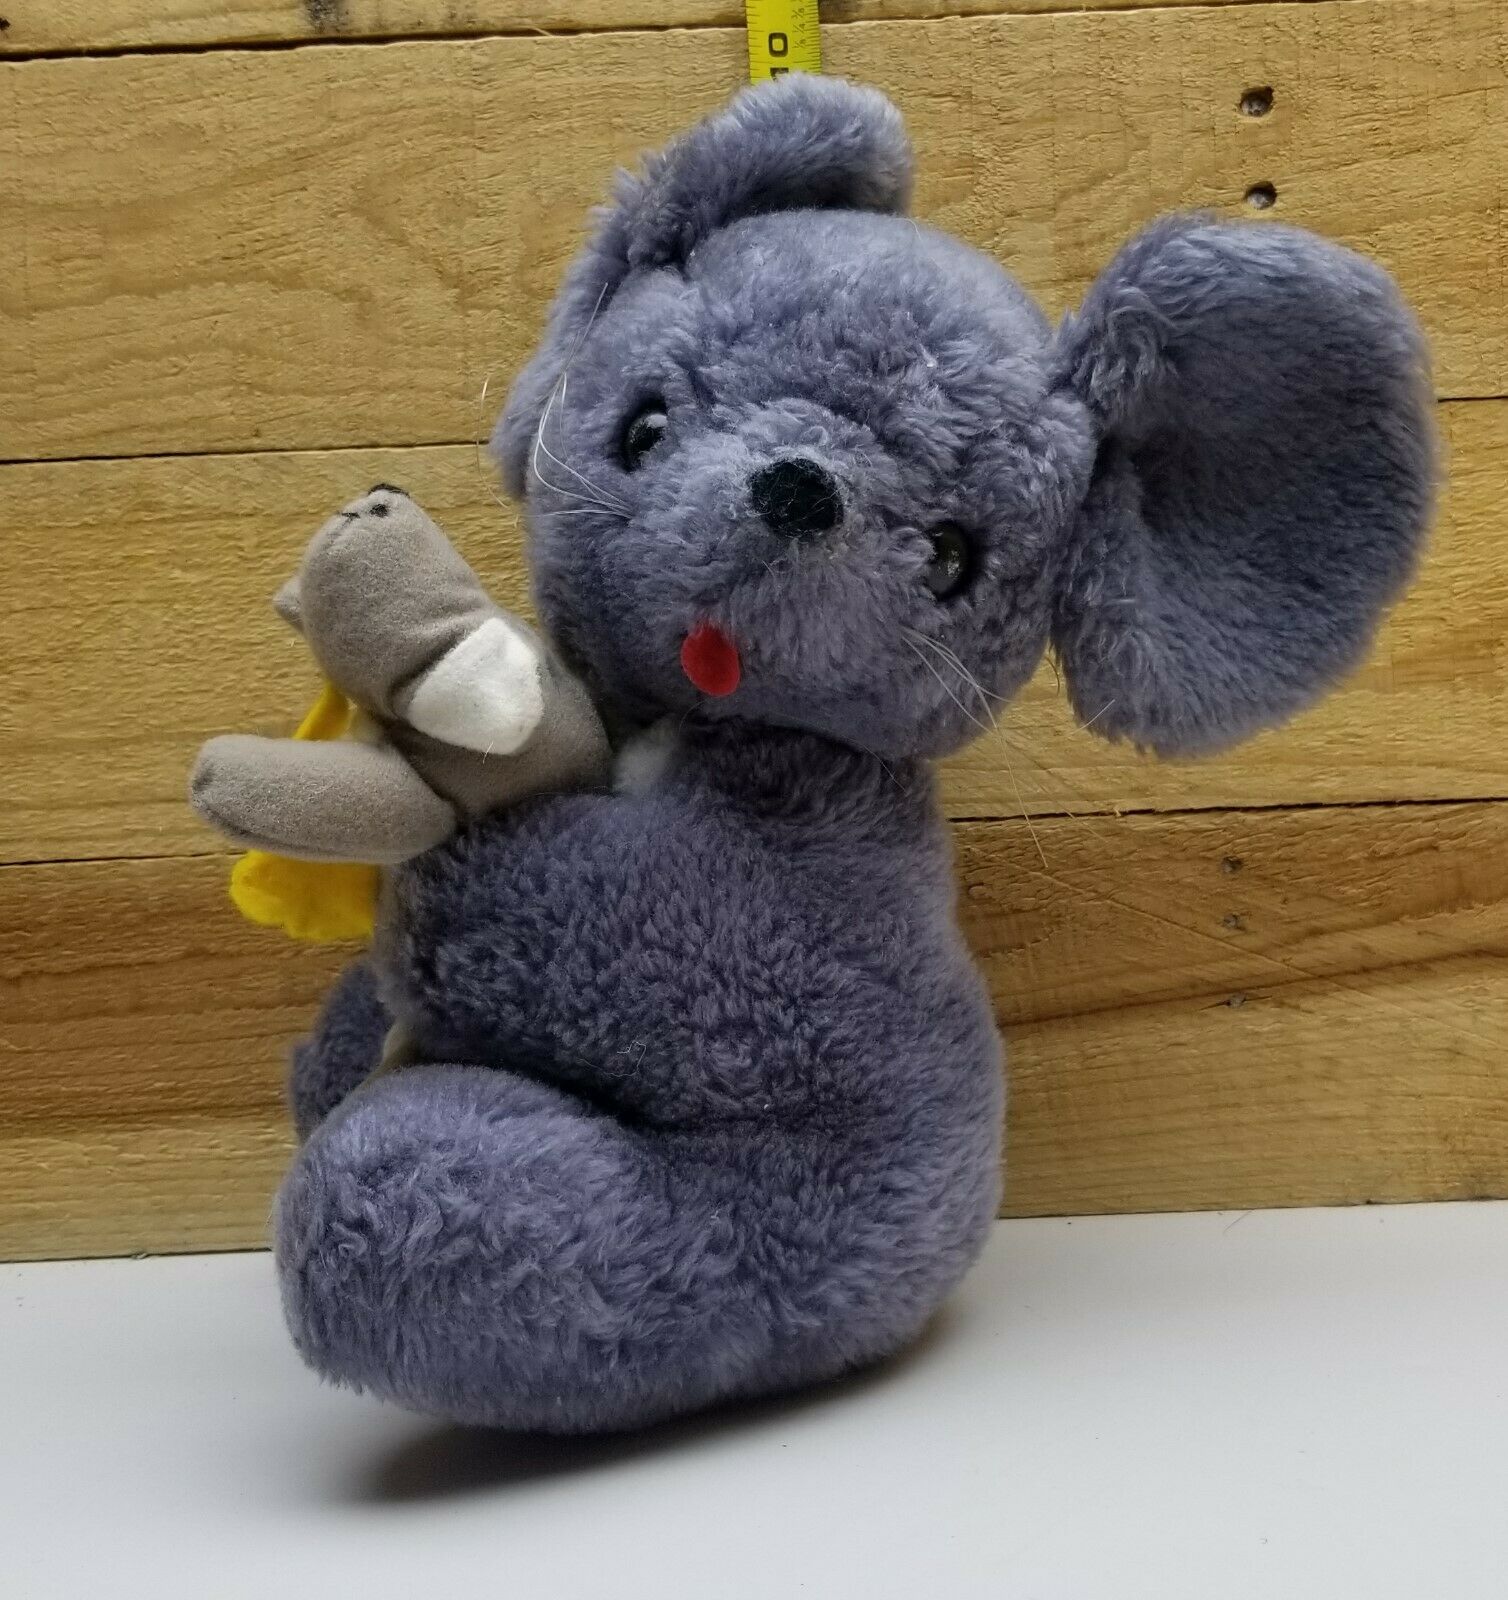 1973 Vintage Dankin Grey Mouse Holding Slice Of Cheese And Stuffed Toy